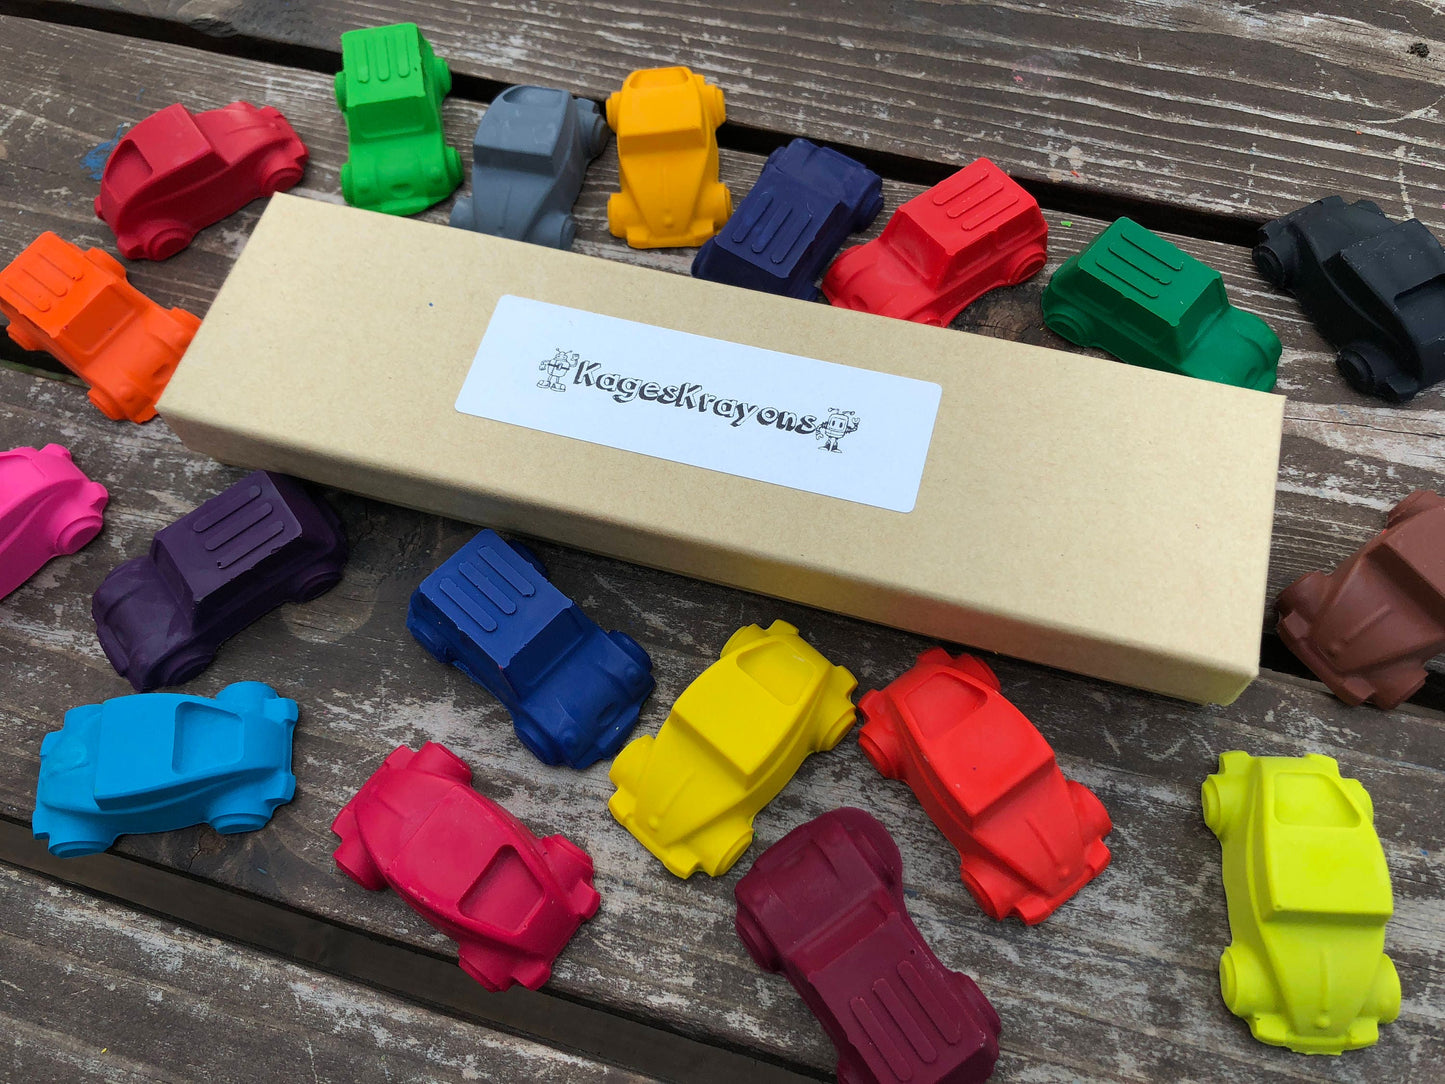 Car Crayons - Car Party Favors - Gifts For Kids - Stocking Stuffers For Kids - Birthday Gifts - Kids Gifts - Kids Party Favor - Class Favors